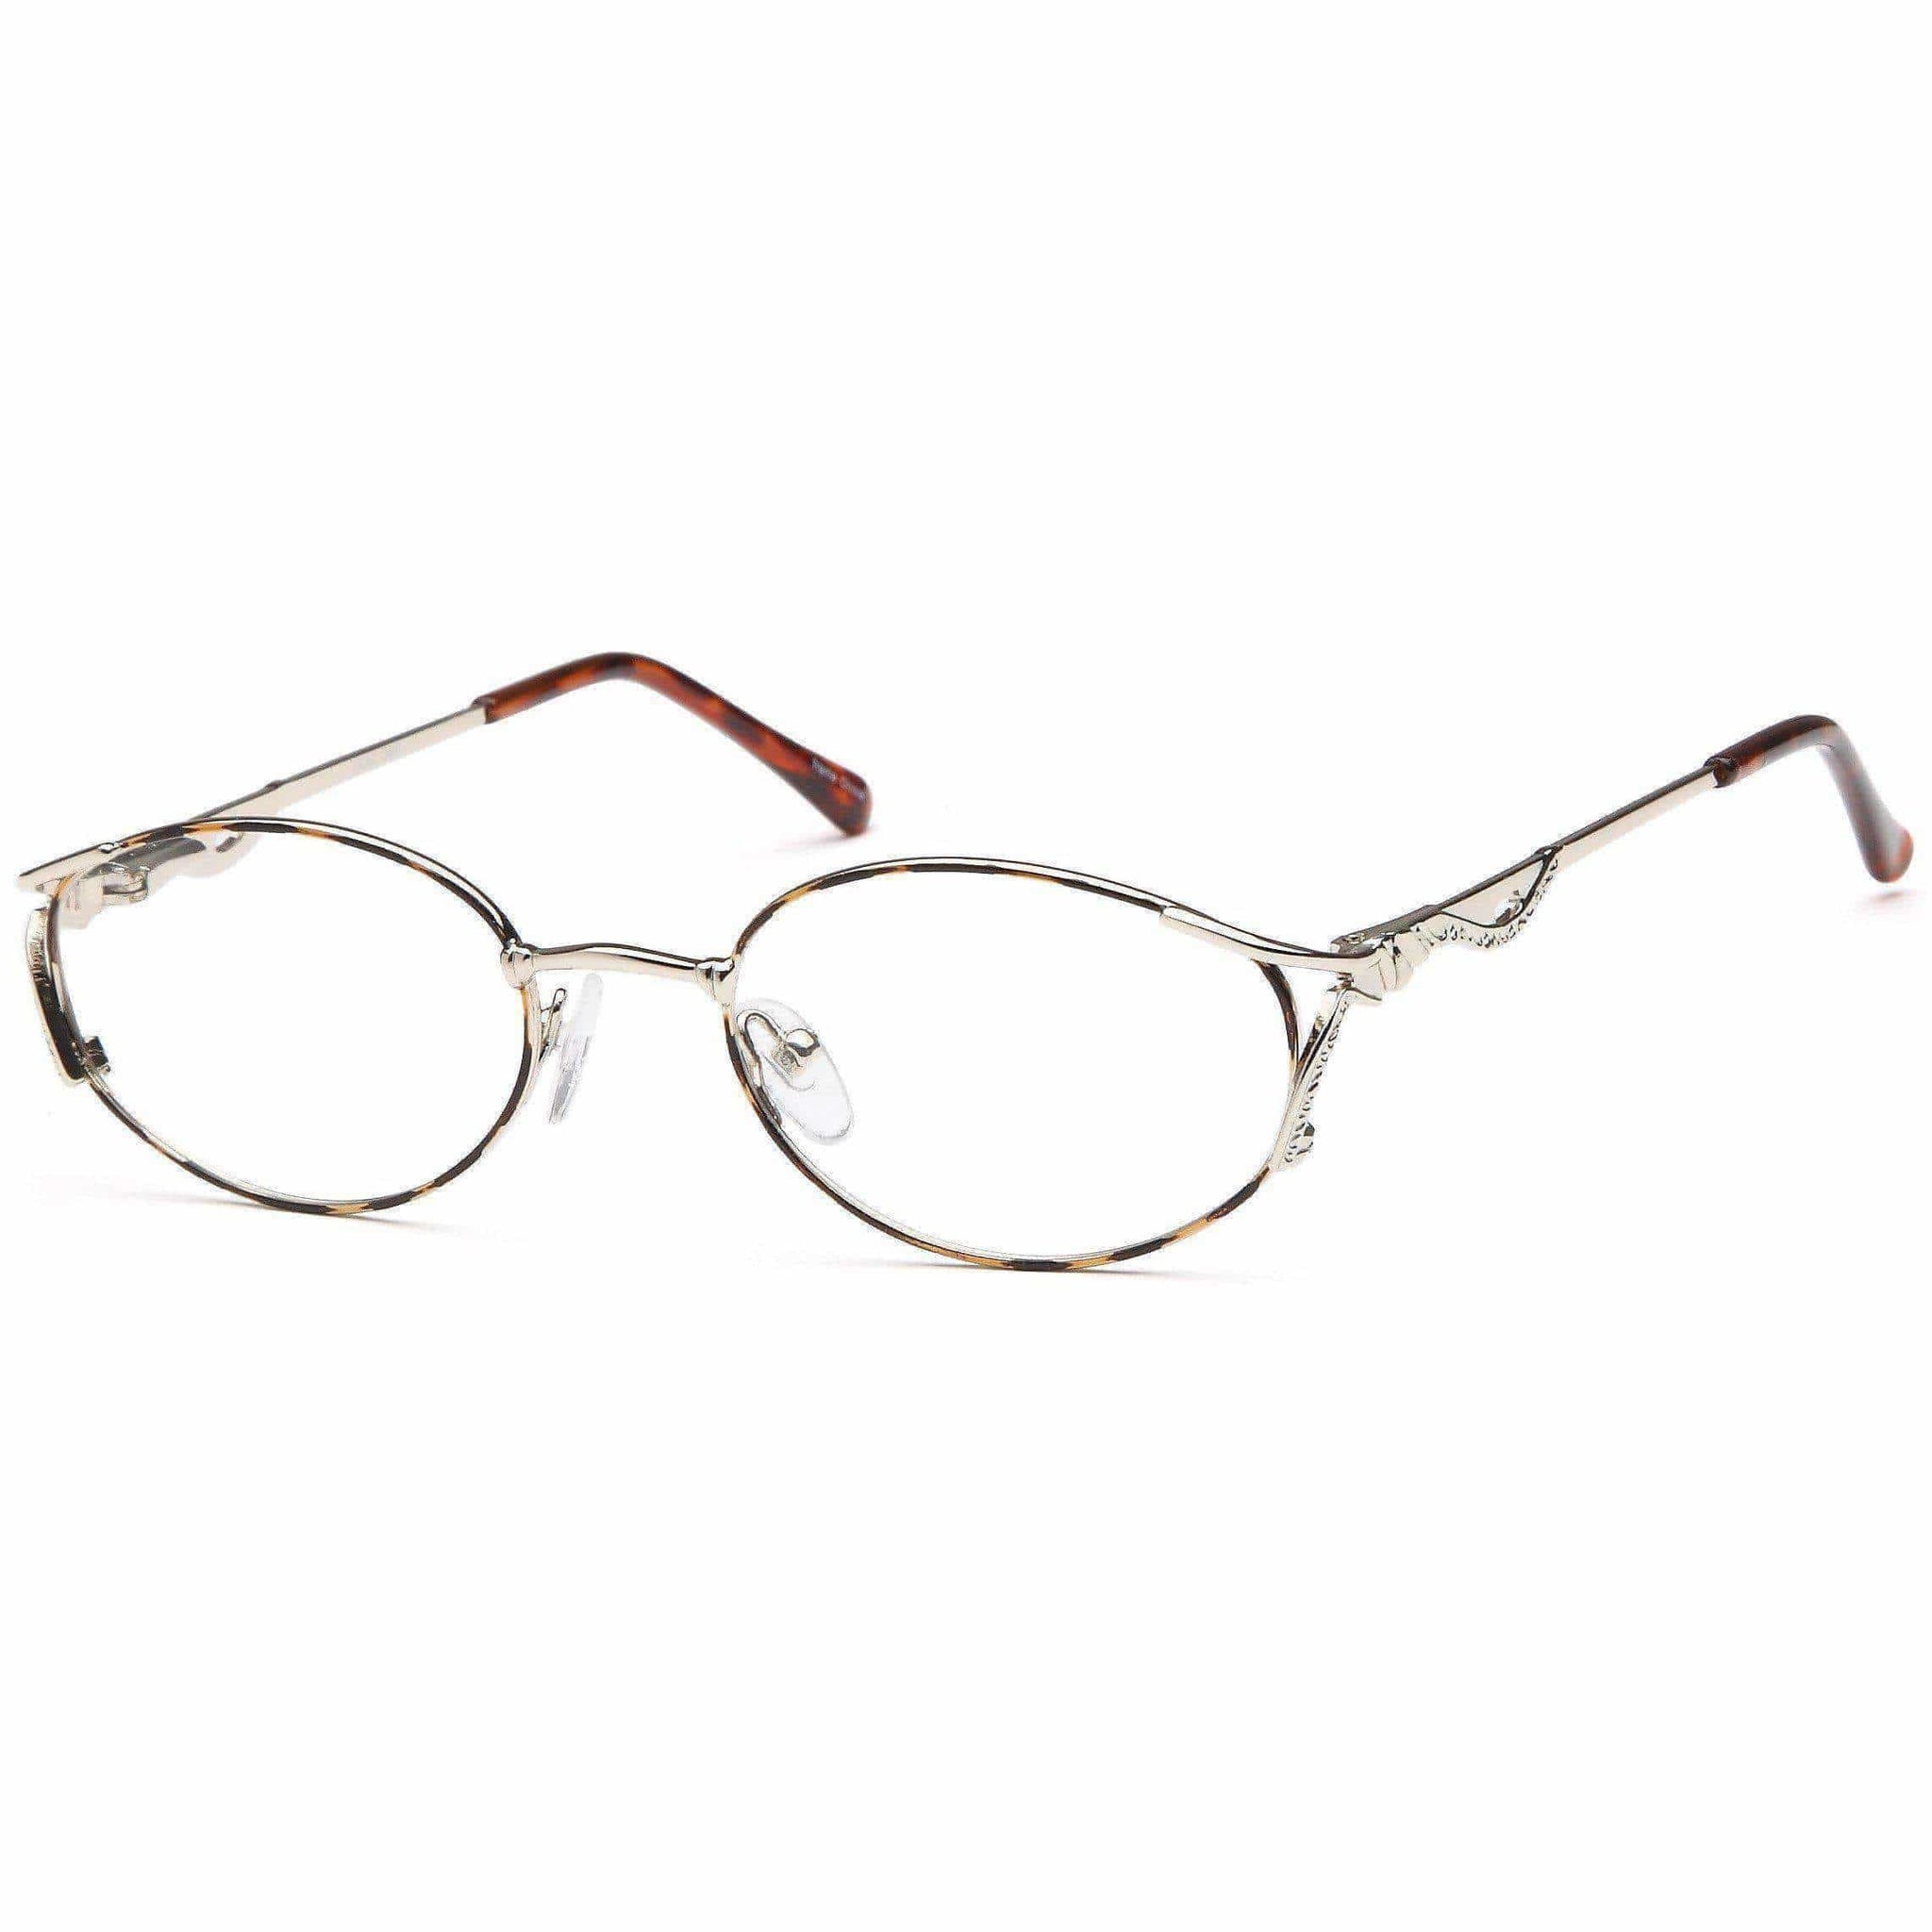 Appletree LILAC - Express glasses